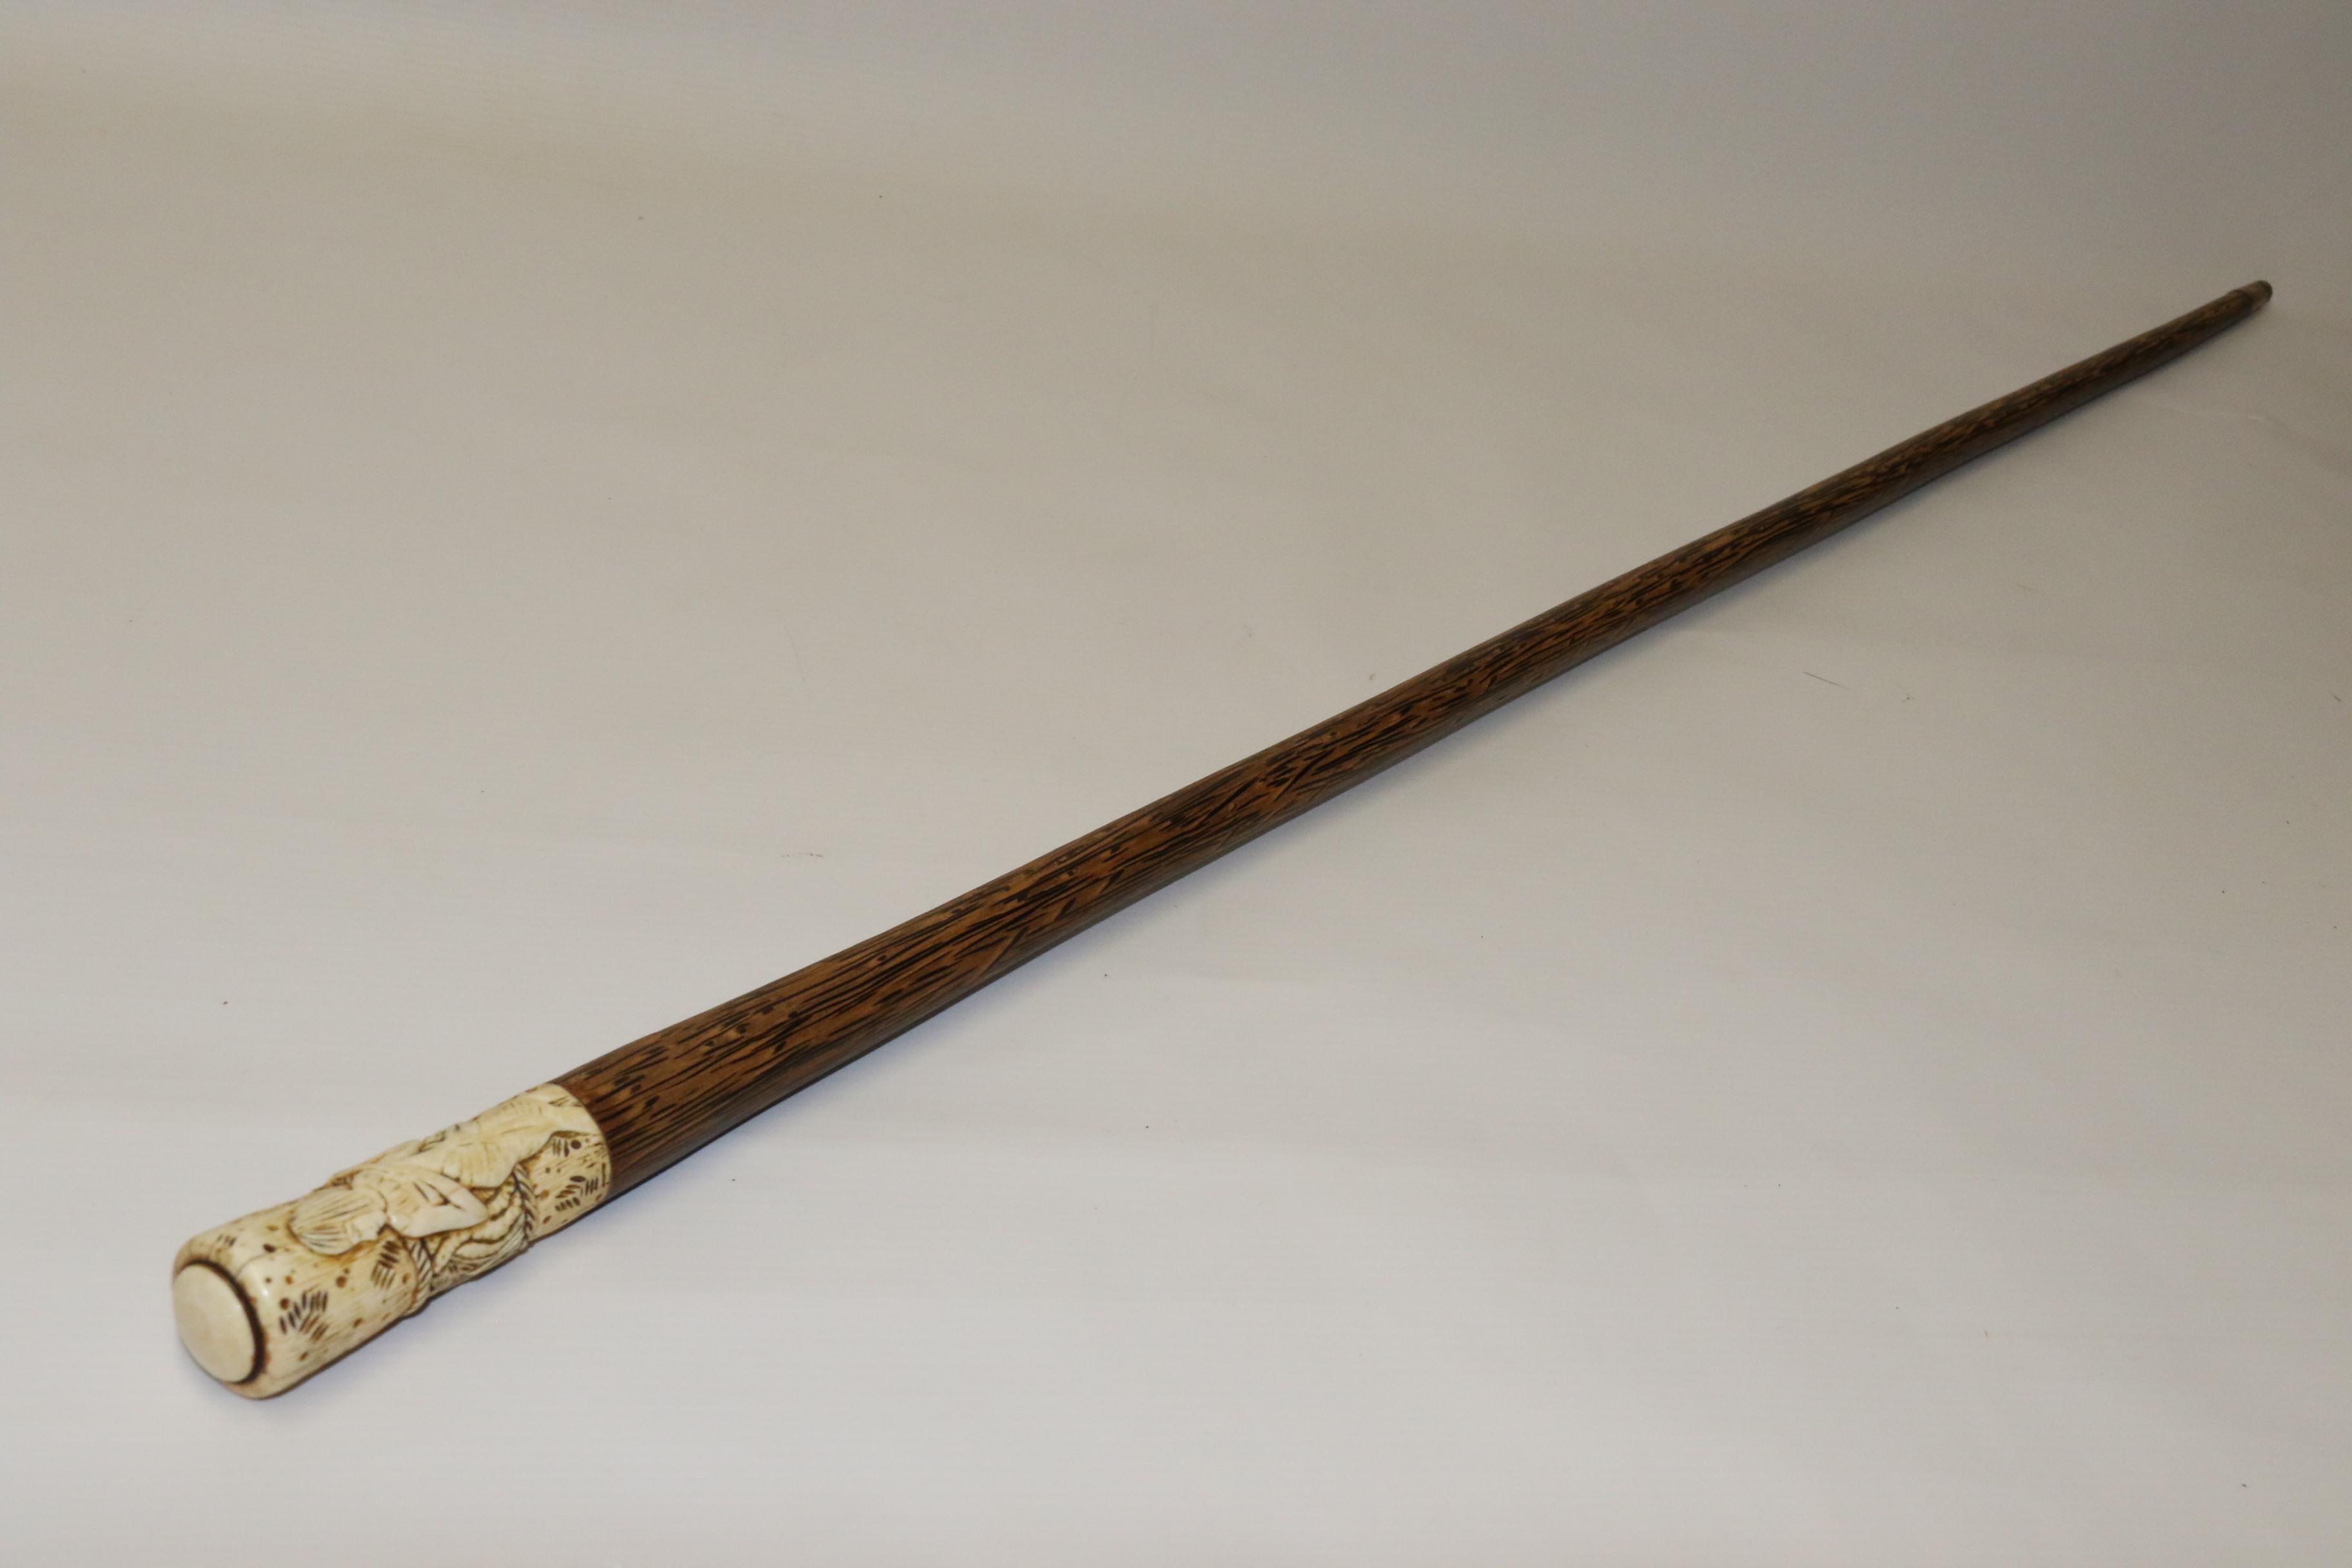 This unusual walking stick dates to the early 20th century and is made from a dense exotic hardwood similar in weight to ebony with a pronounced lighter feathery grain. The handle is made from carved bone with a single female native figure set